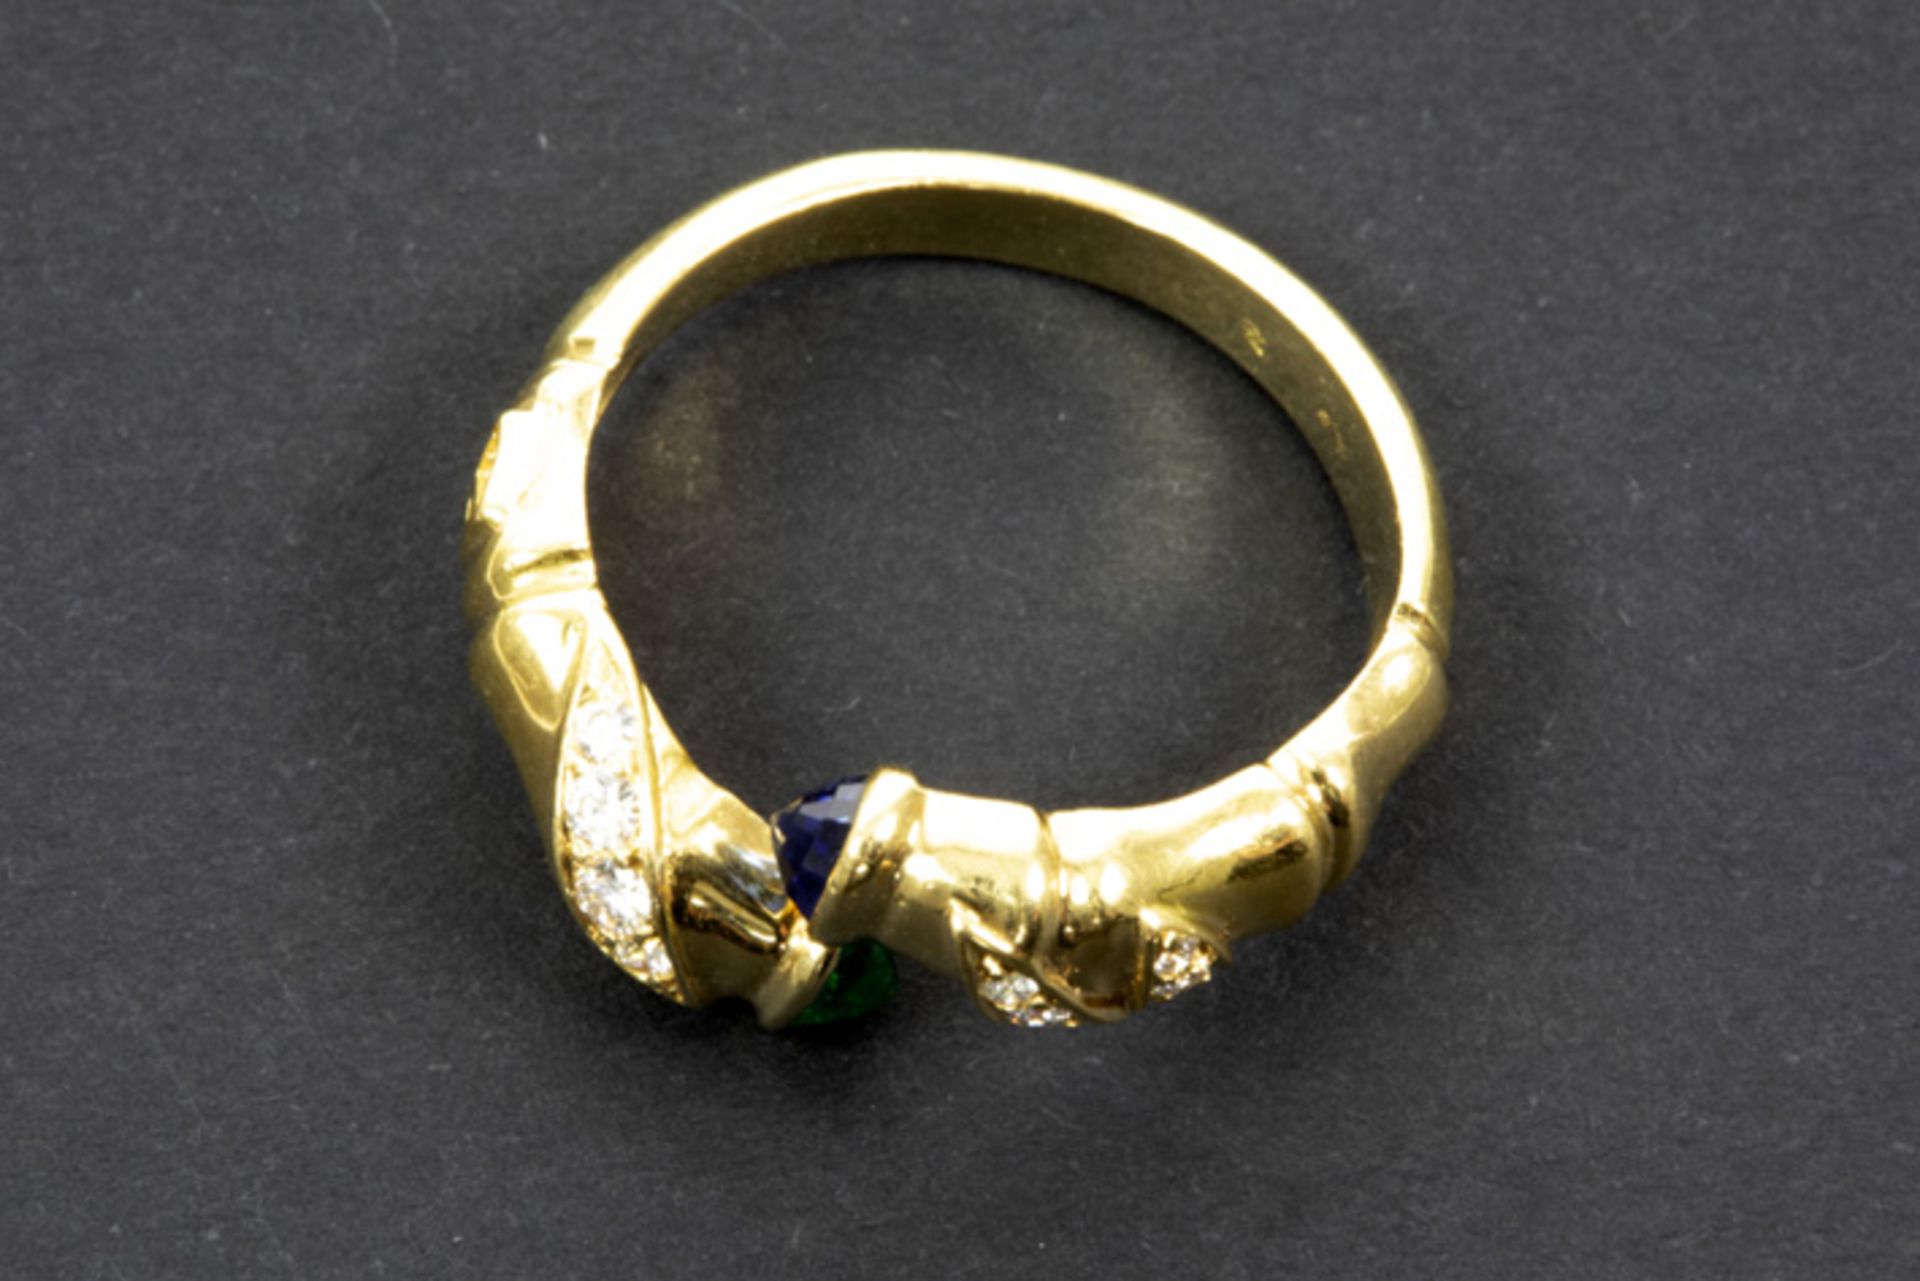 ring with a Cartier like design in yellow gold (18 carat) with a cabochon cut emerald and sapphire - Image 3 of 3